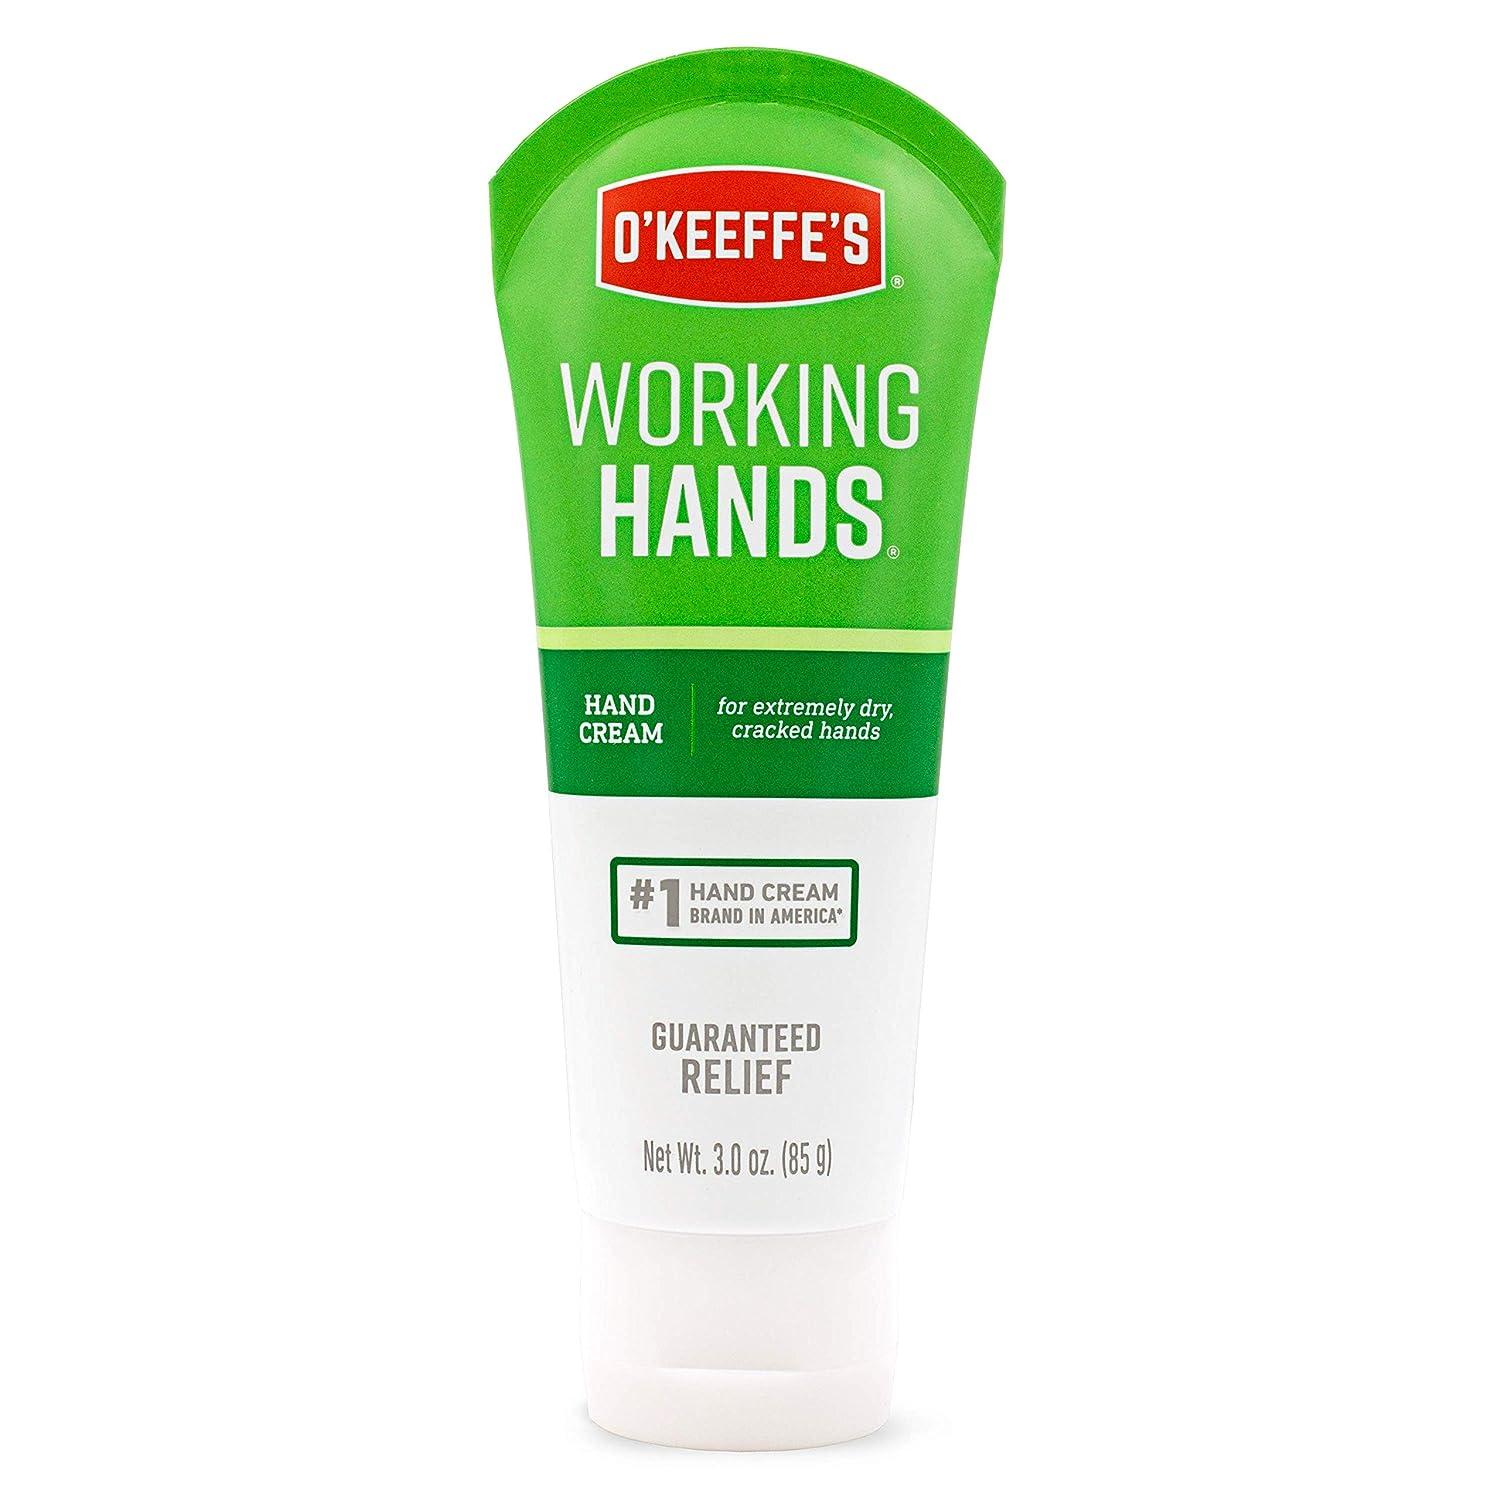 O'Keeffe's Working Hands Moisturizing Hand Soap with Fresh Orange Oil, 12  oz Pump (Pack of 2)   price tracker / tracking,  price history  charts,  price watches,  price drop